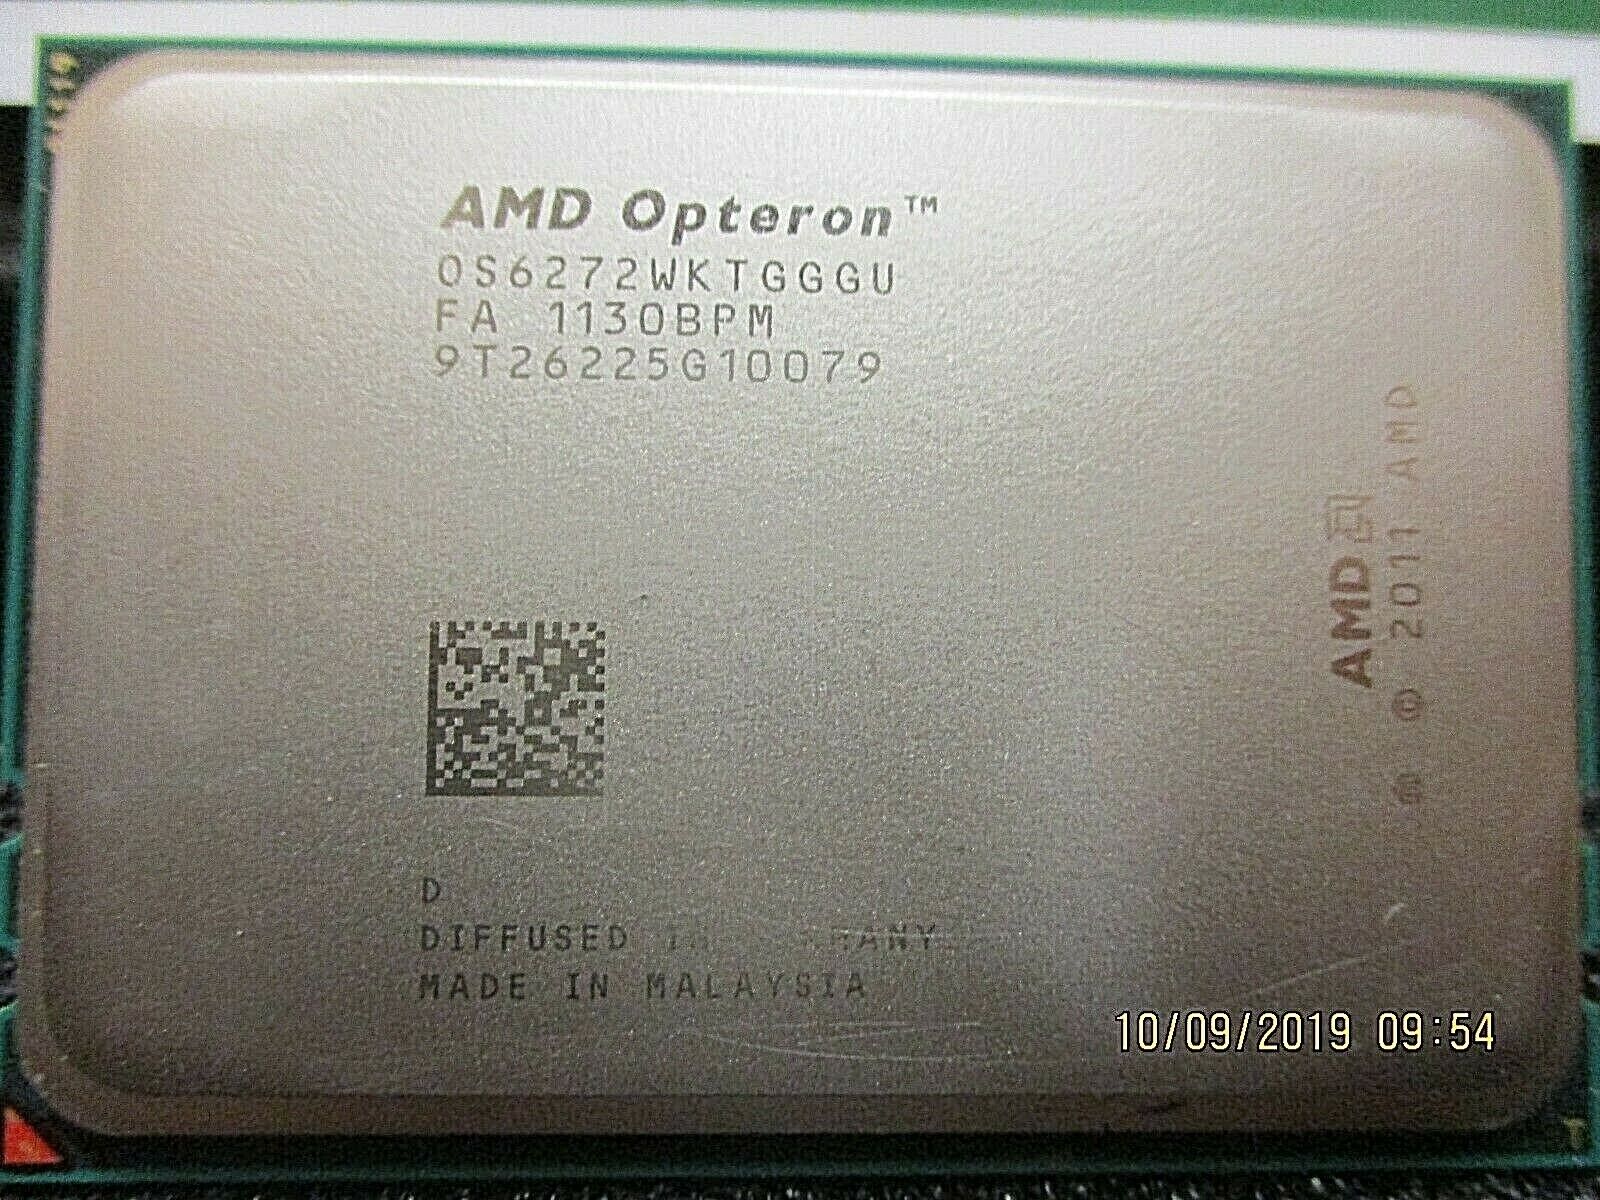 AMD-OS6272WKTGGGU - Hexadeca-Core 6272 2.1Ghz 16Mb L2 Cache 16Mb L3 Cache 3.2Ghz